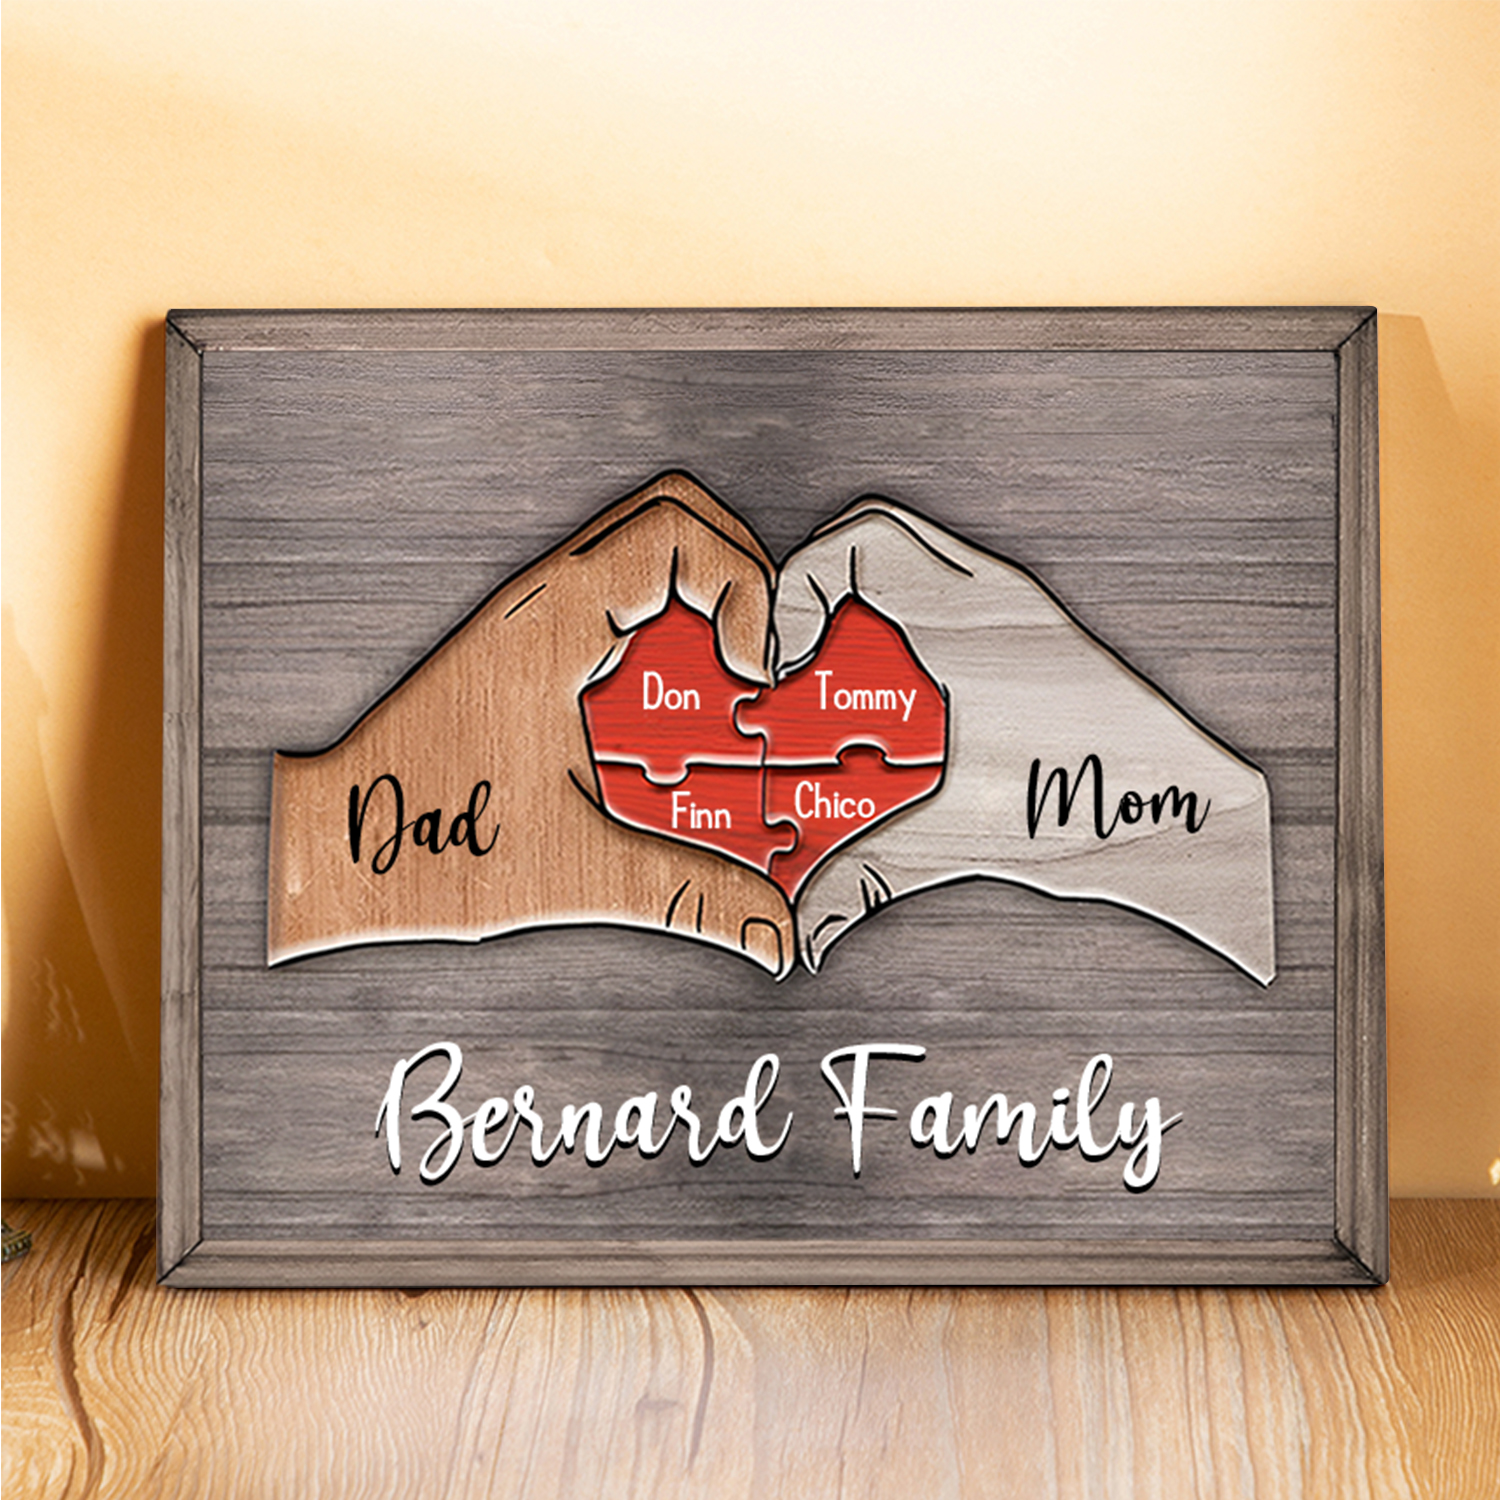 4 Names - Personalized Love Heart Customized Name and Text Wooden Ornament Father's Day Gift for Dad